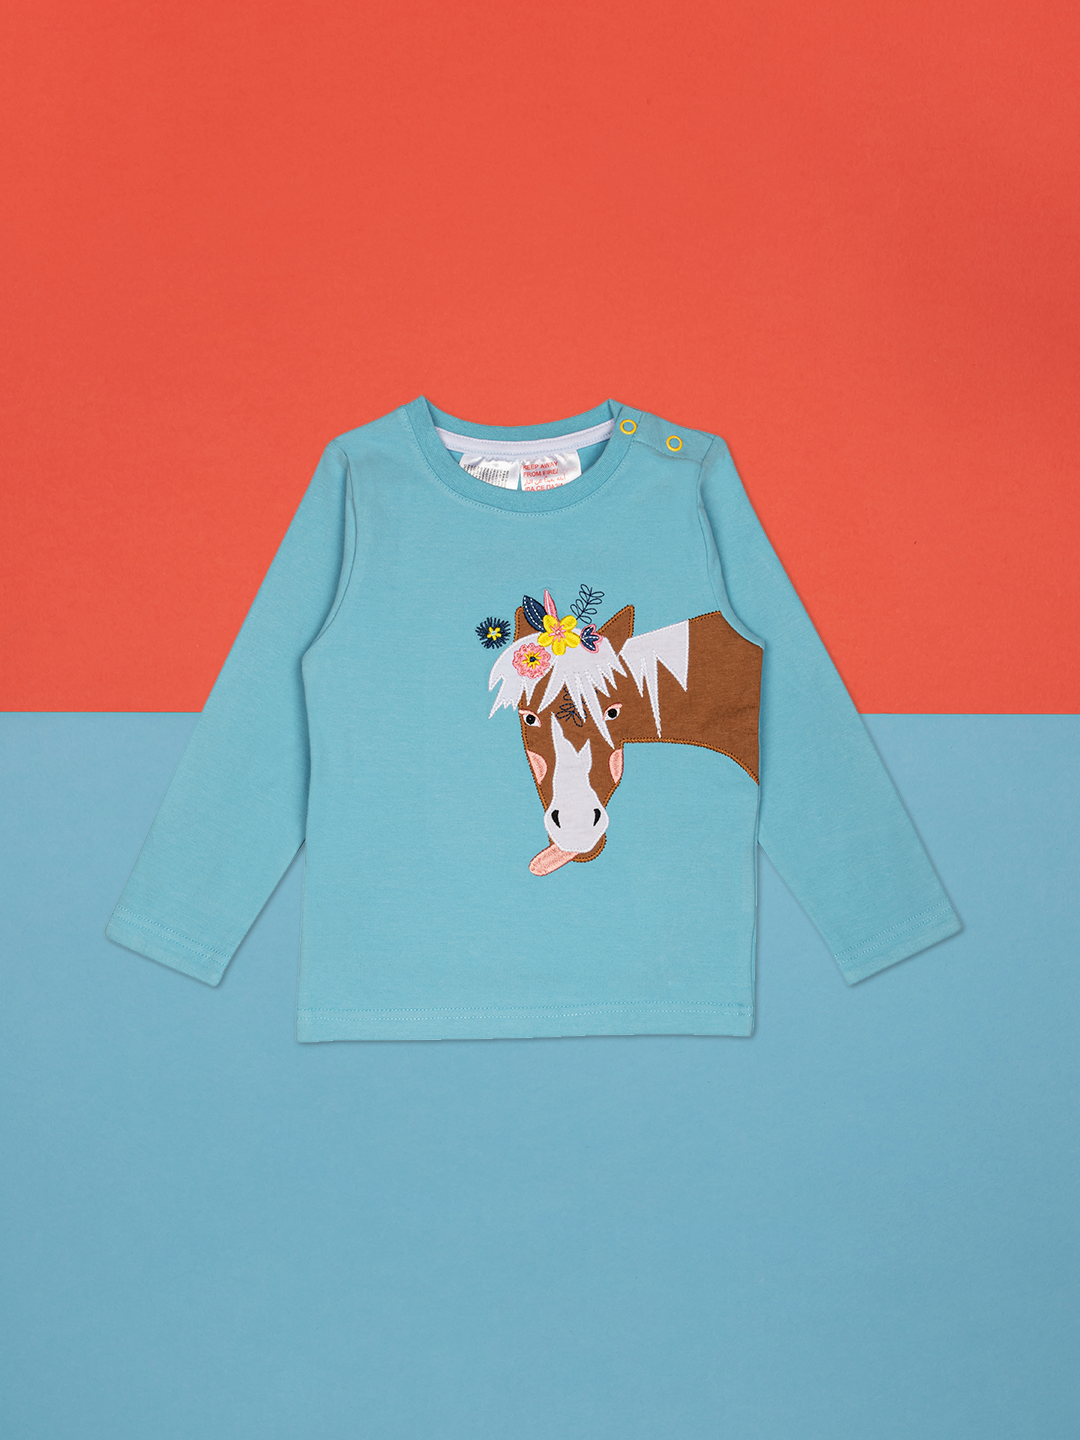 light blue long sleeved top with a brown horse face and neck with a white mane, sticking out a tongue with pretty flowers on the top of her head